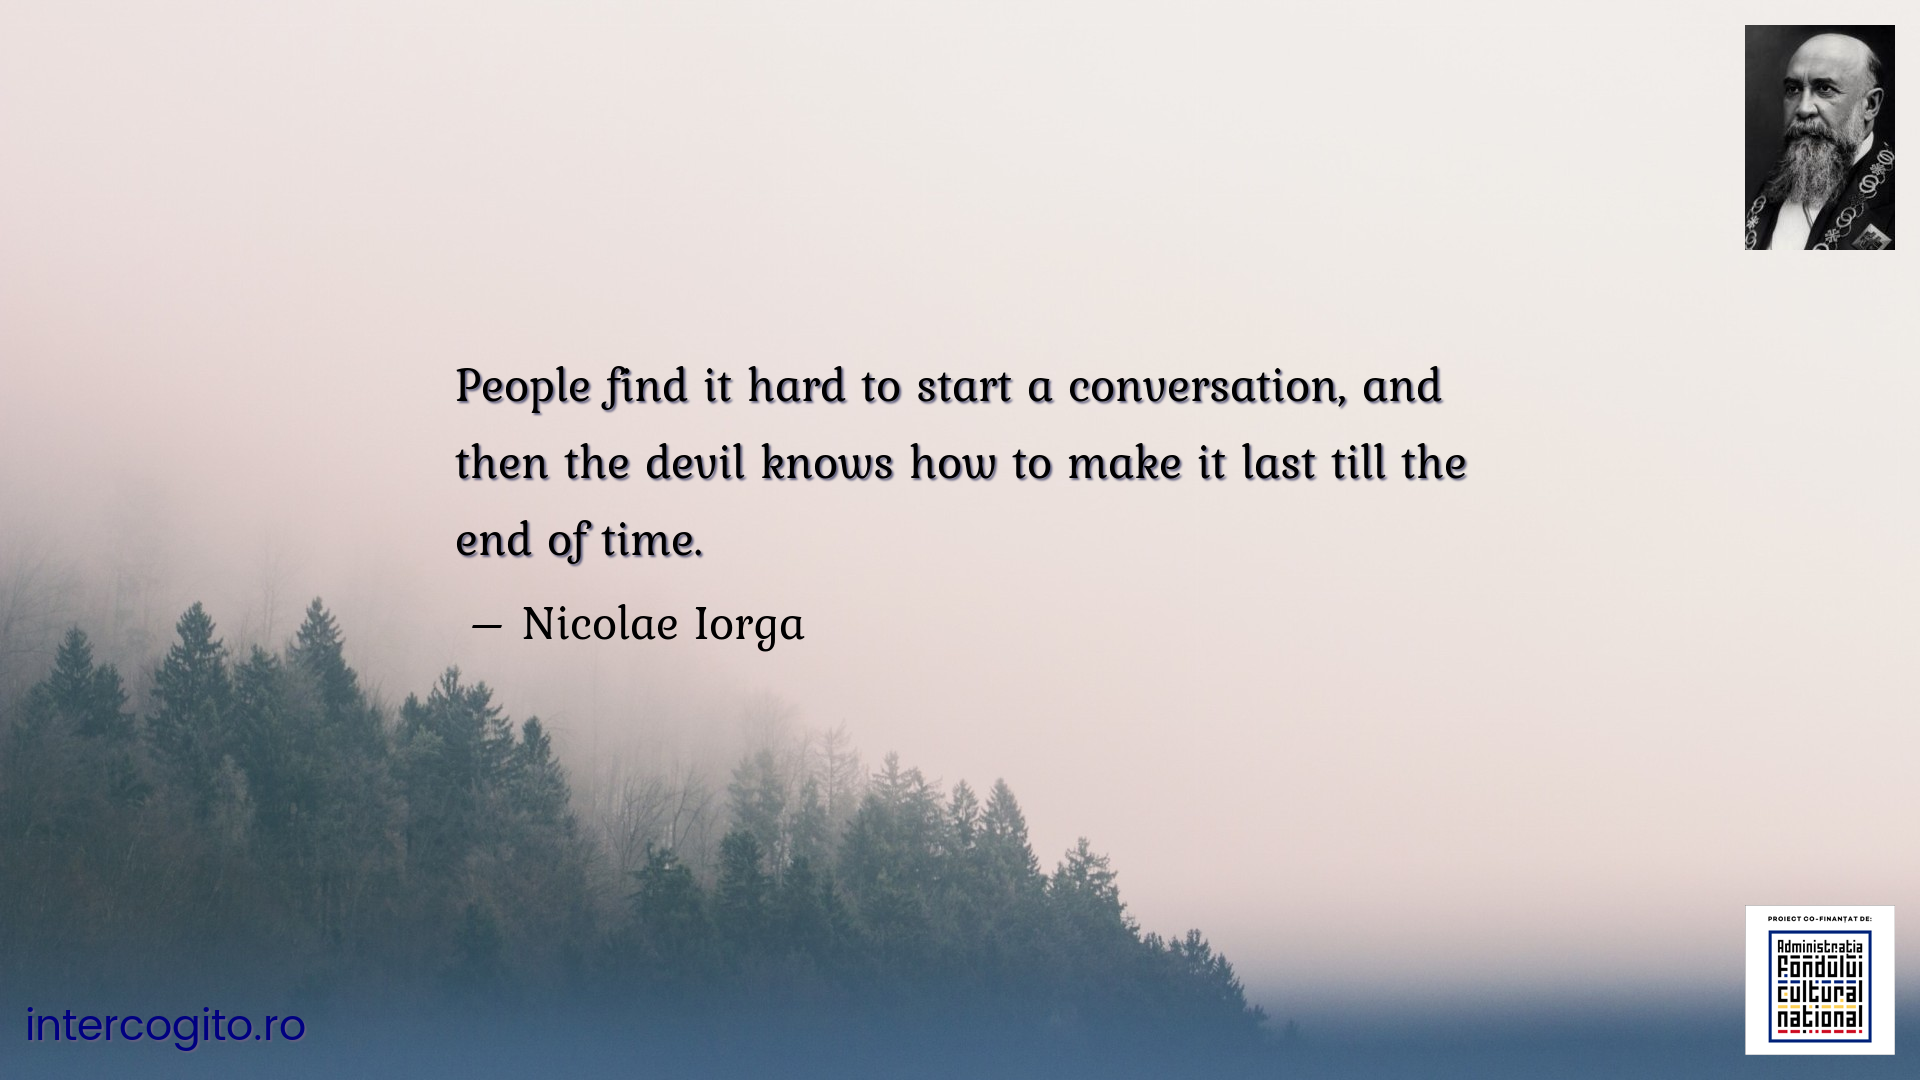 People find it hard to start a conversation, and then the devil knows how to make it last till the end of time.